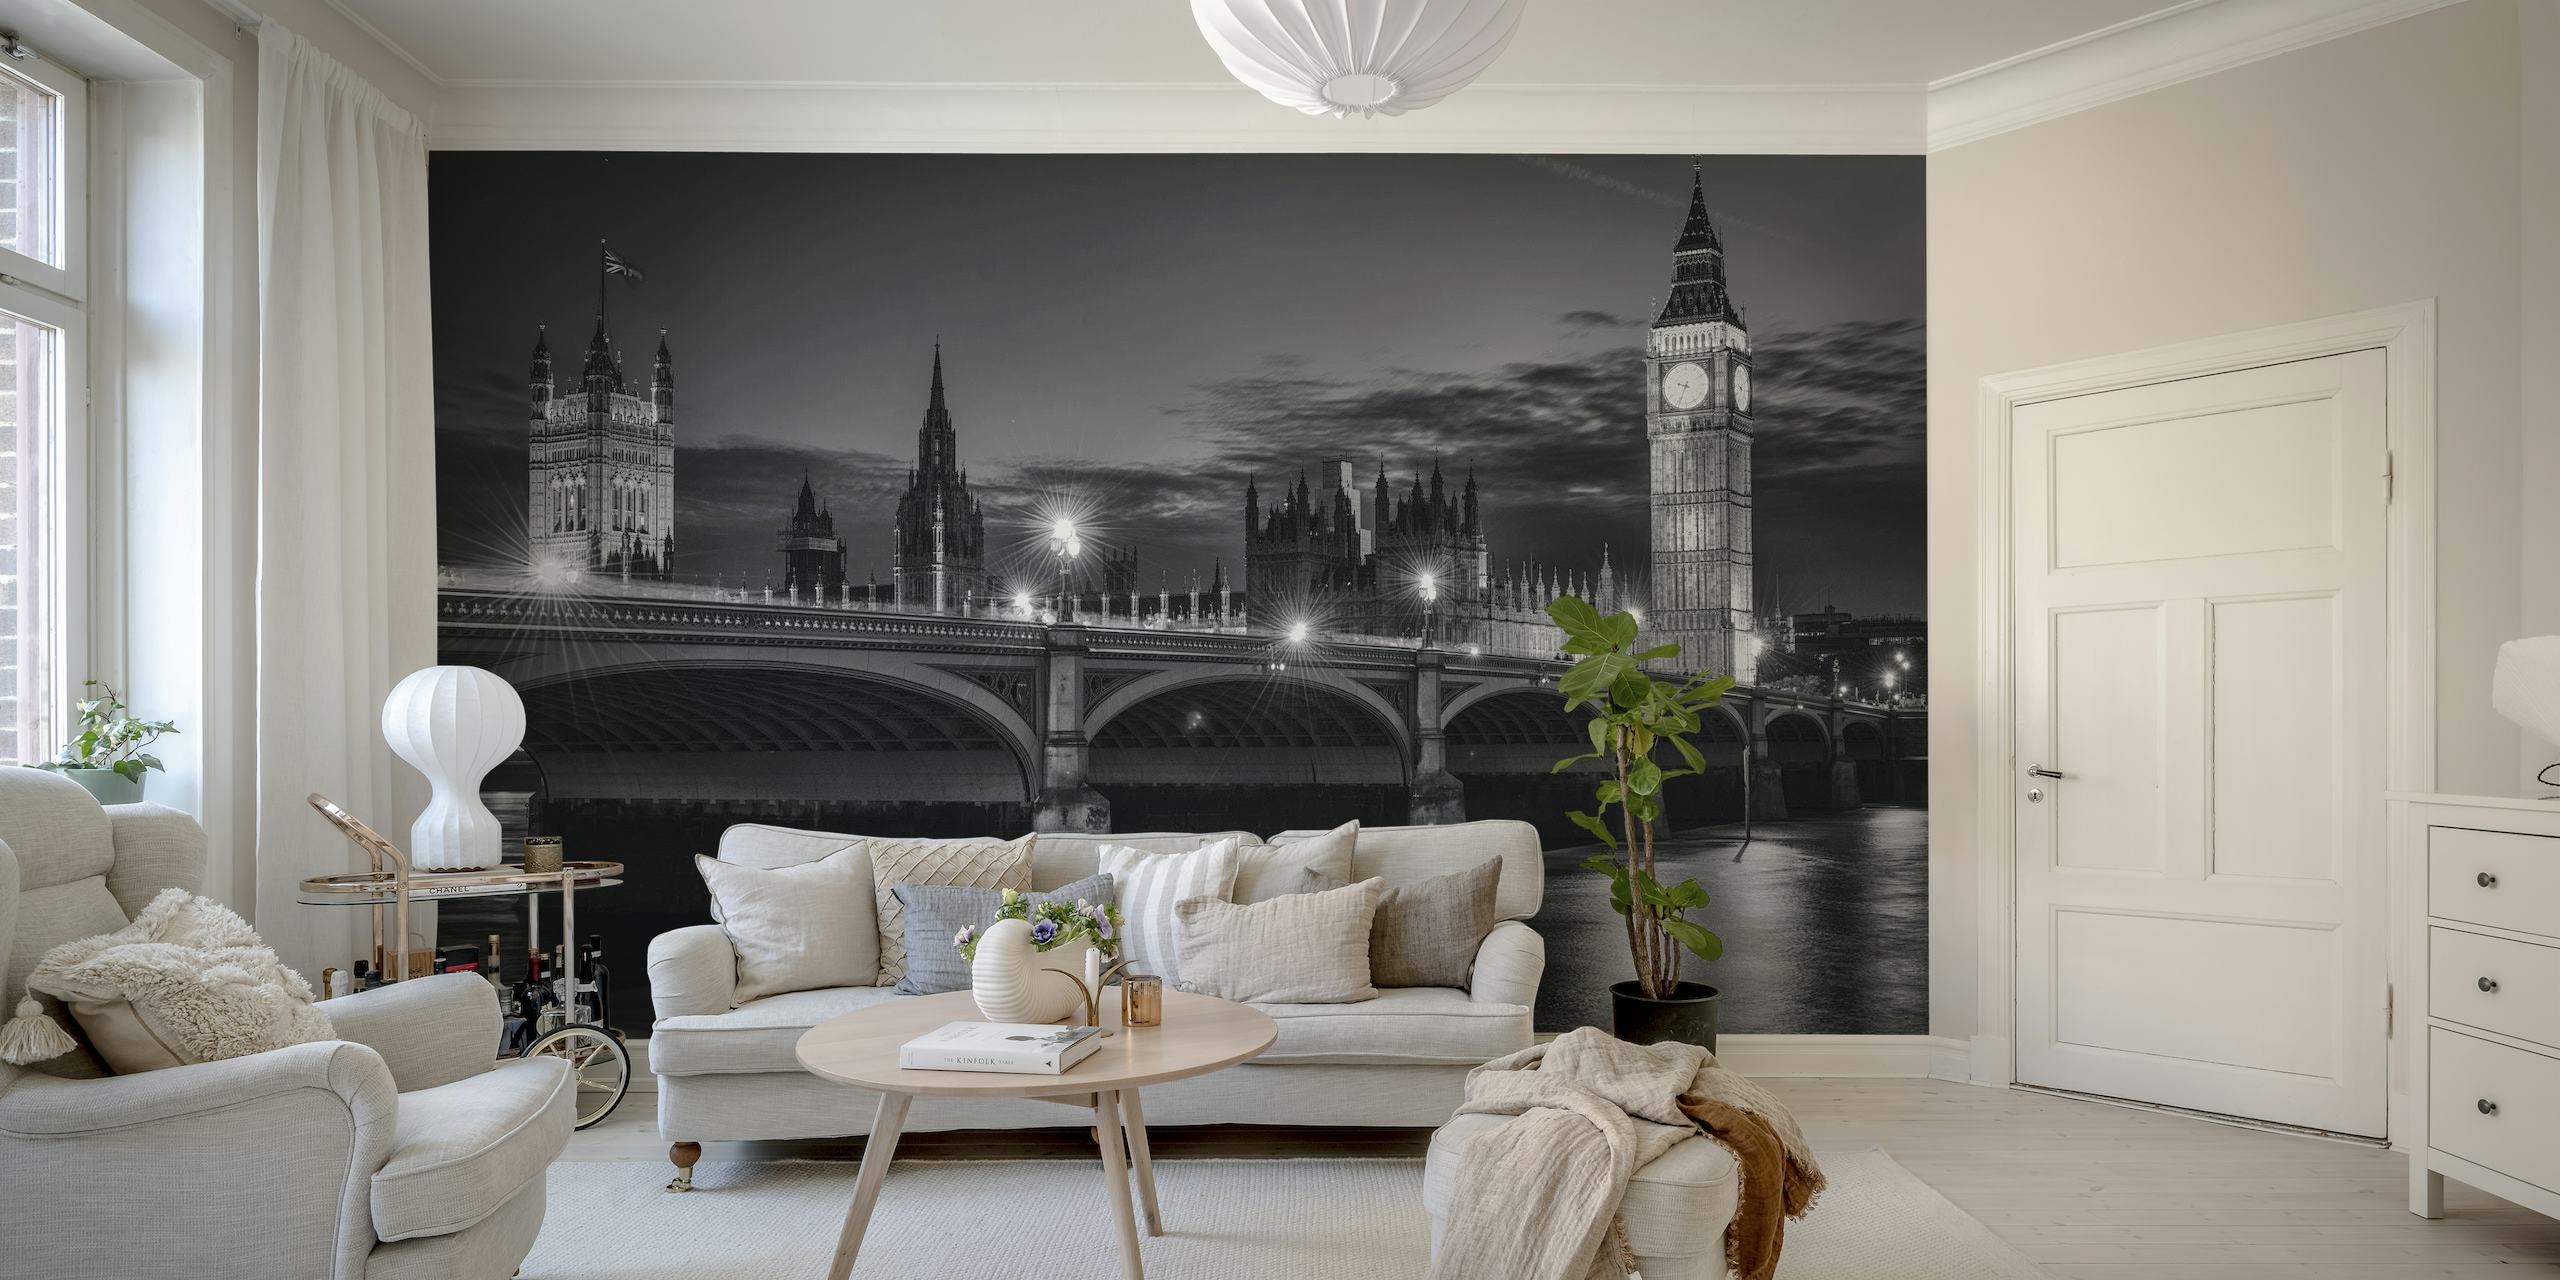 Monochromatic cityscape wall mural depicting historical landmarks and a bridge